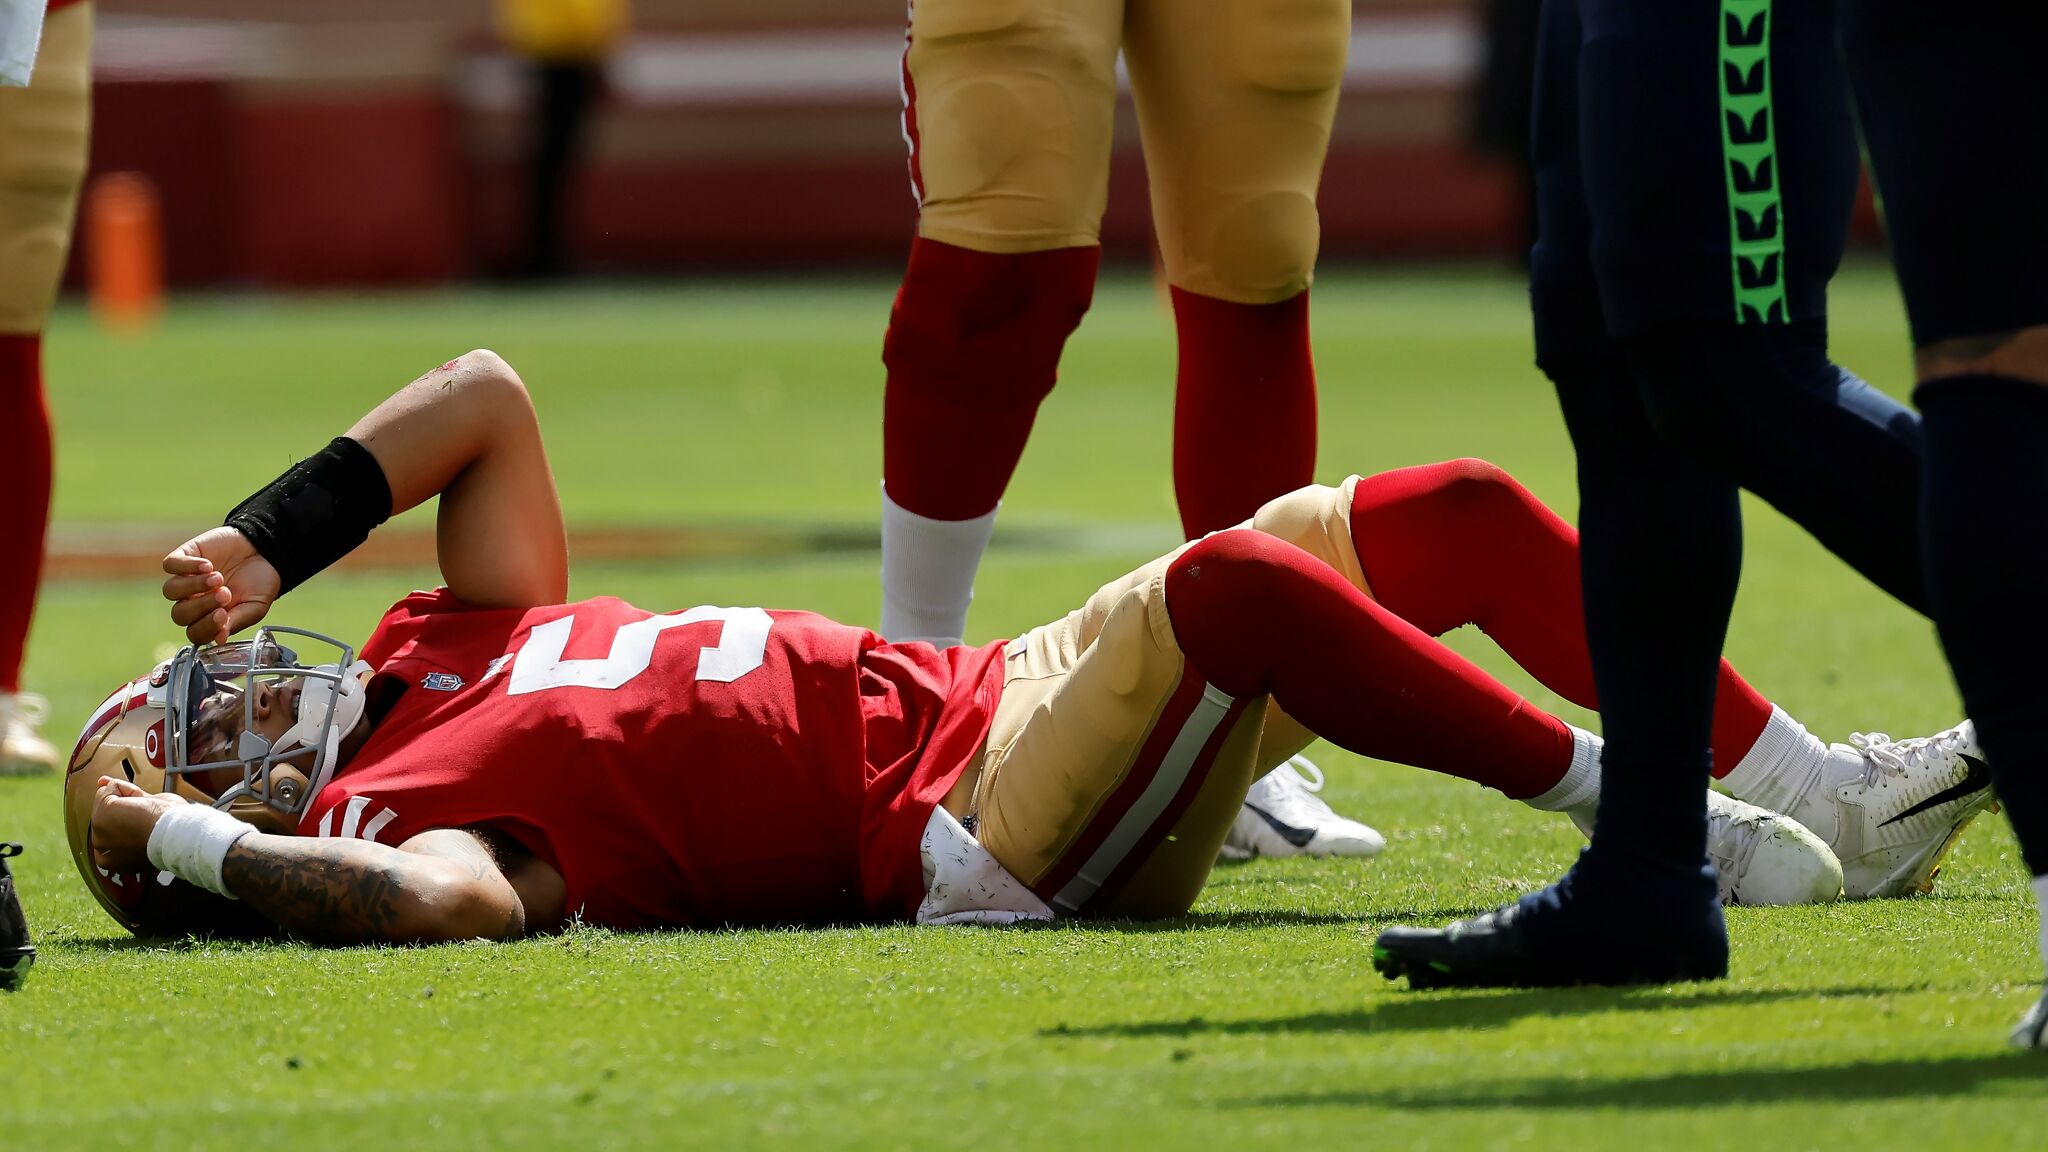 49ers' Trey Lance replaced by Jimmy G after scary ankle injury